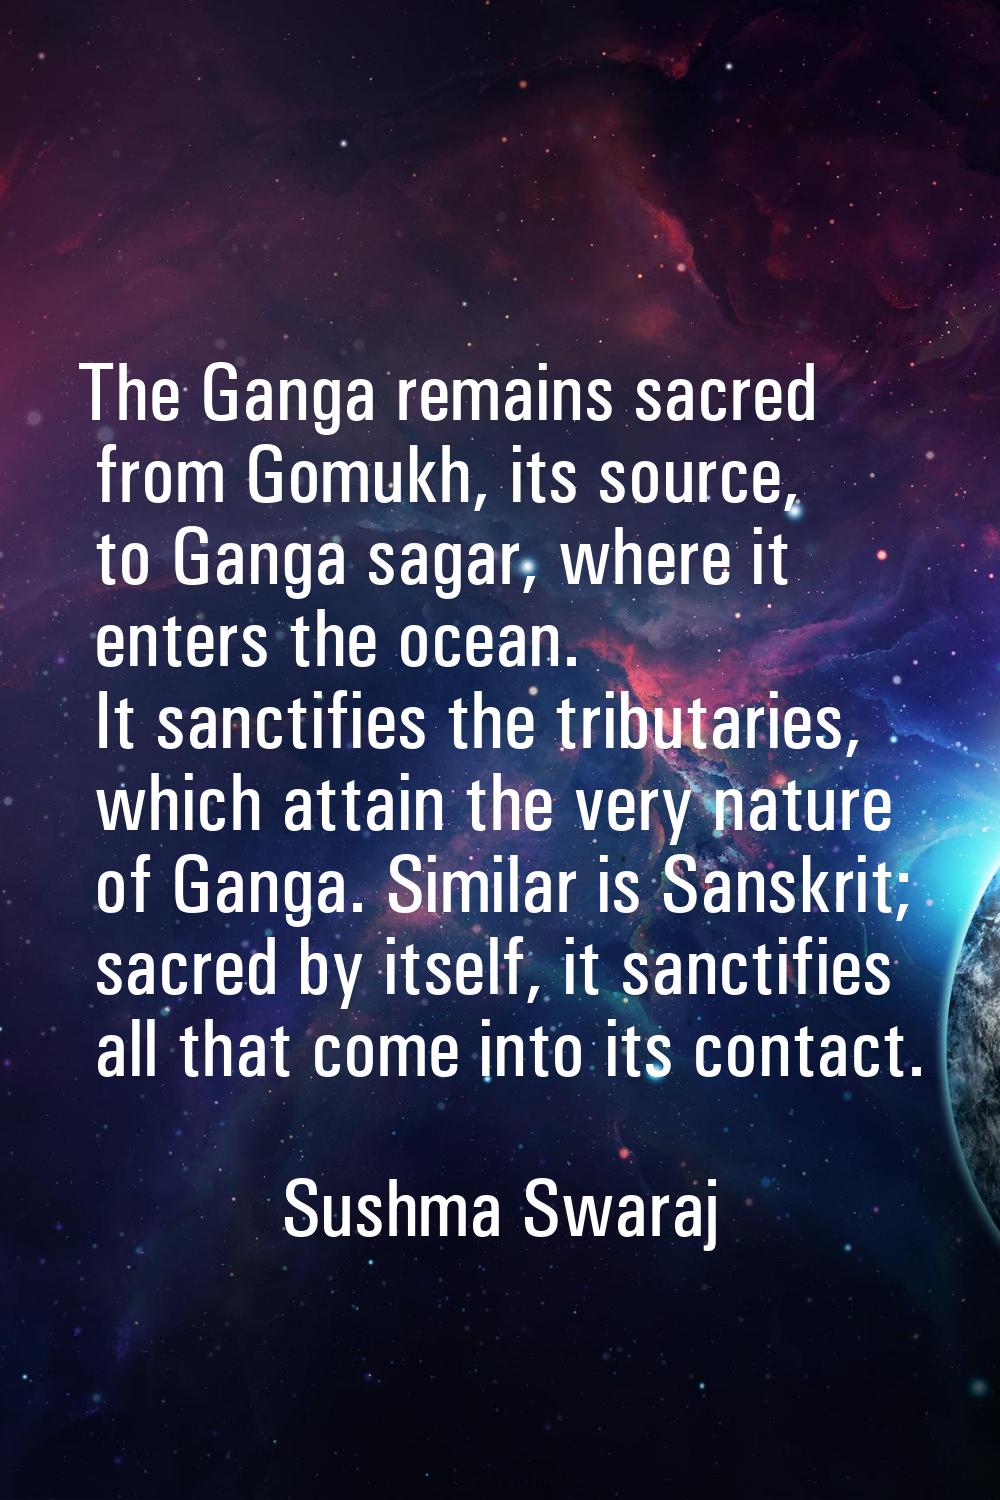 The Ganga remains sacred from Gomukh, its source, to Ganga sagar, where it enters the ocean. It san